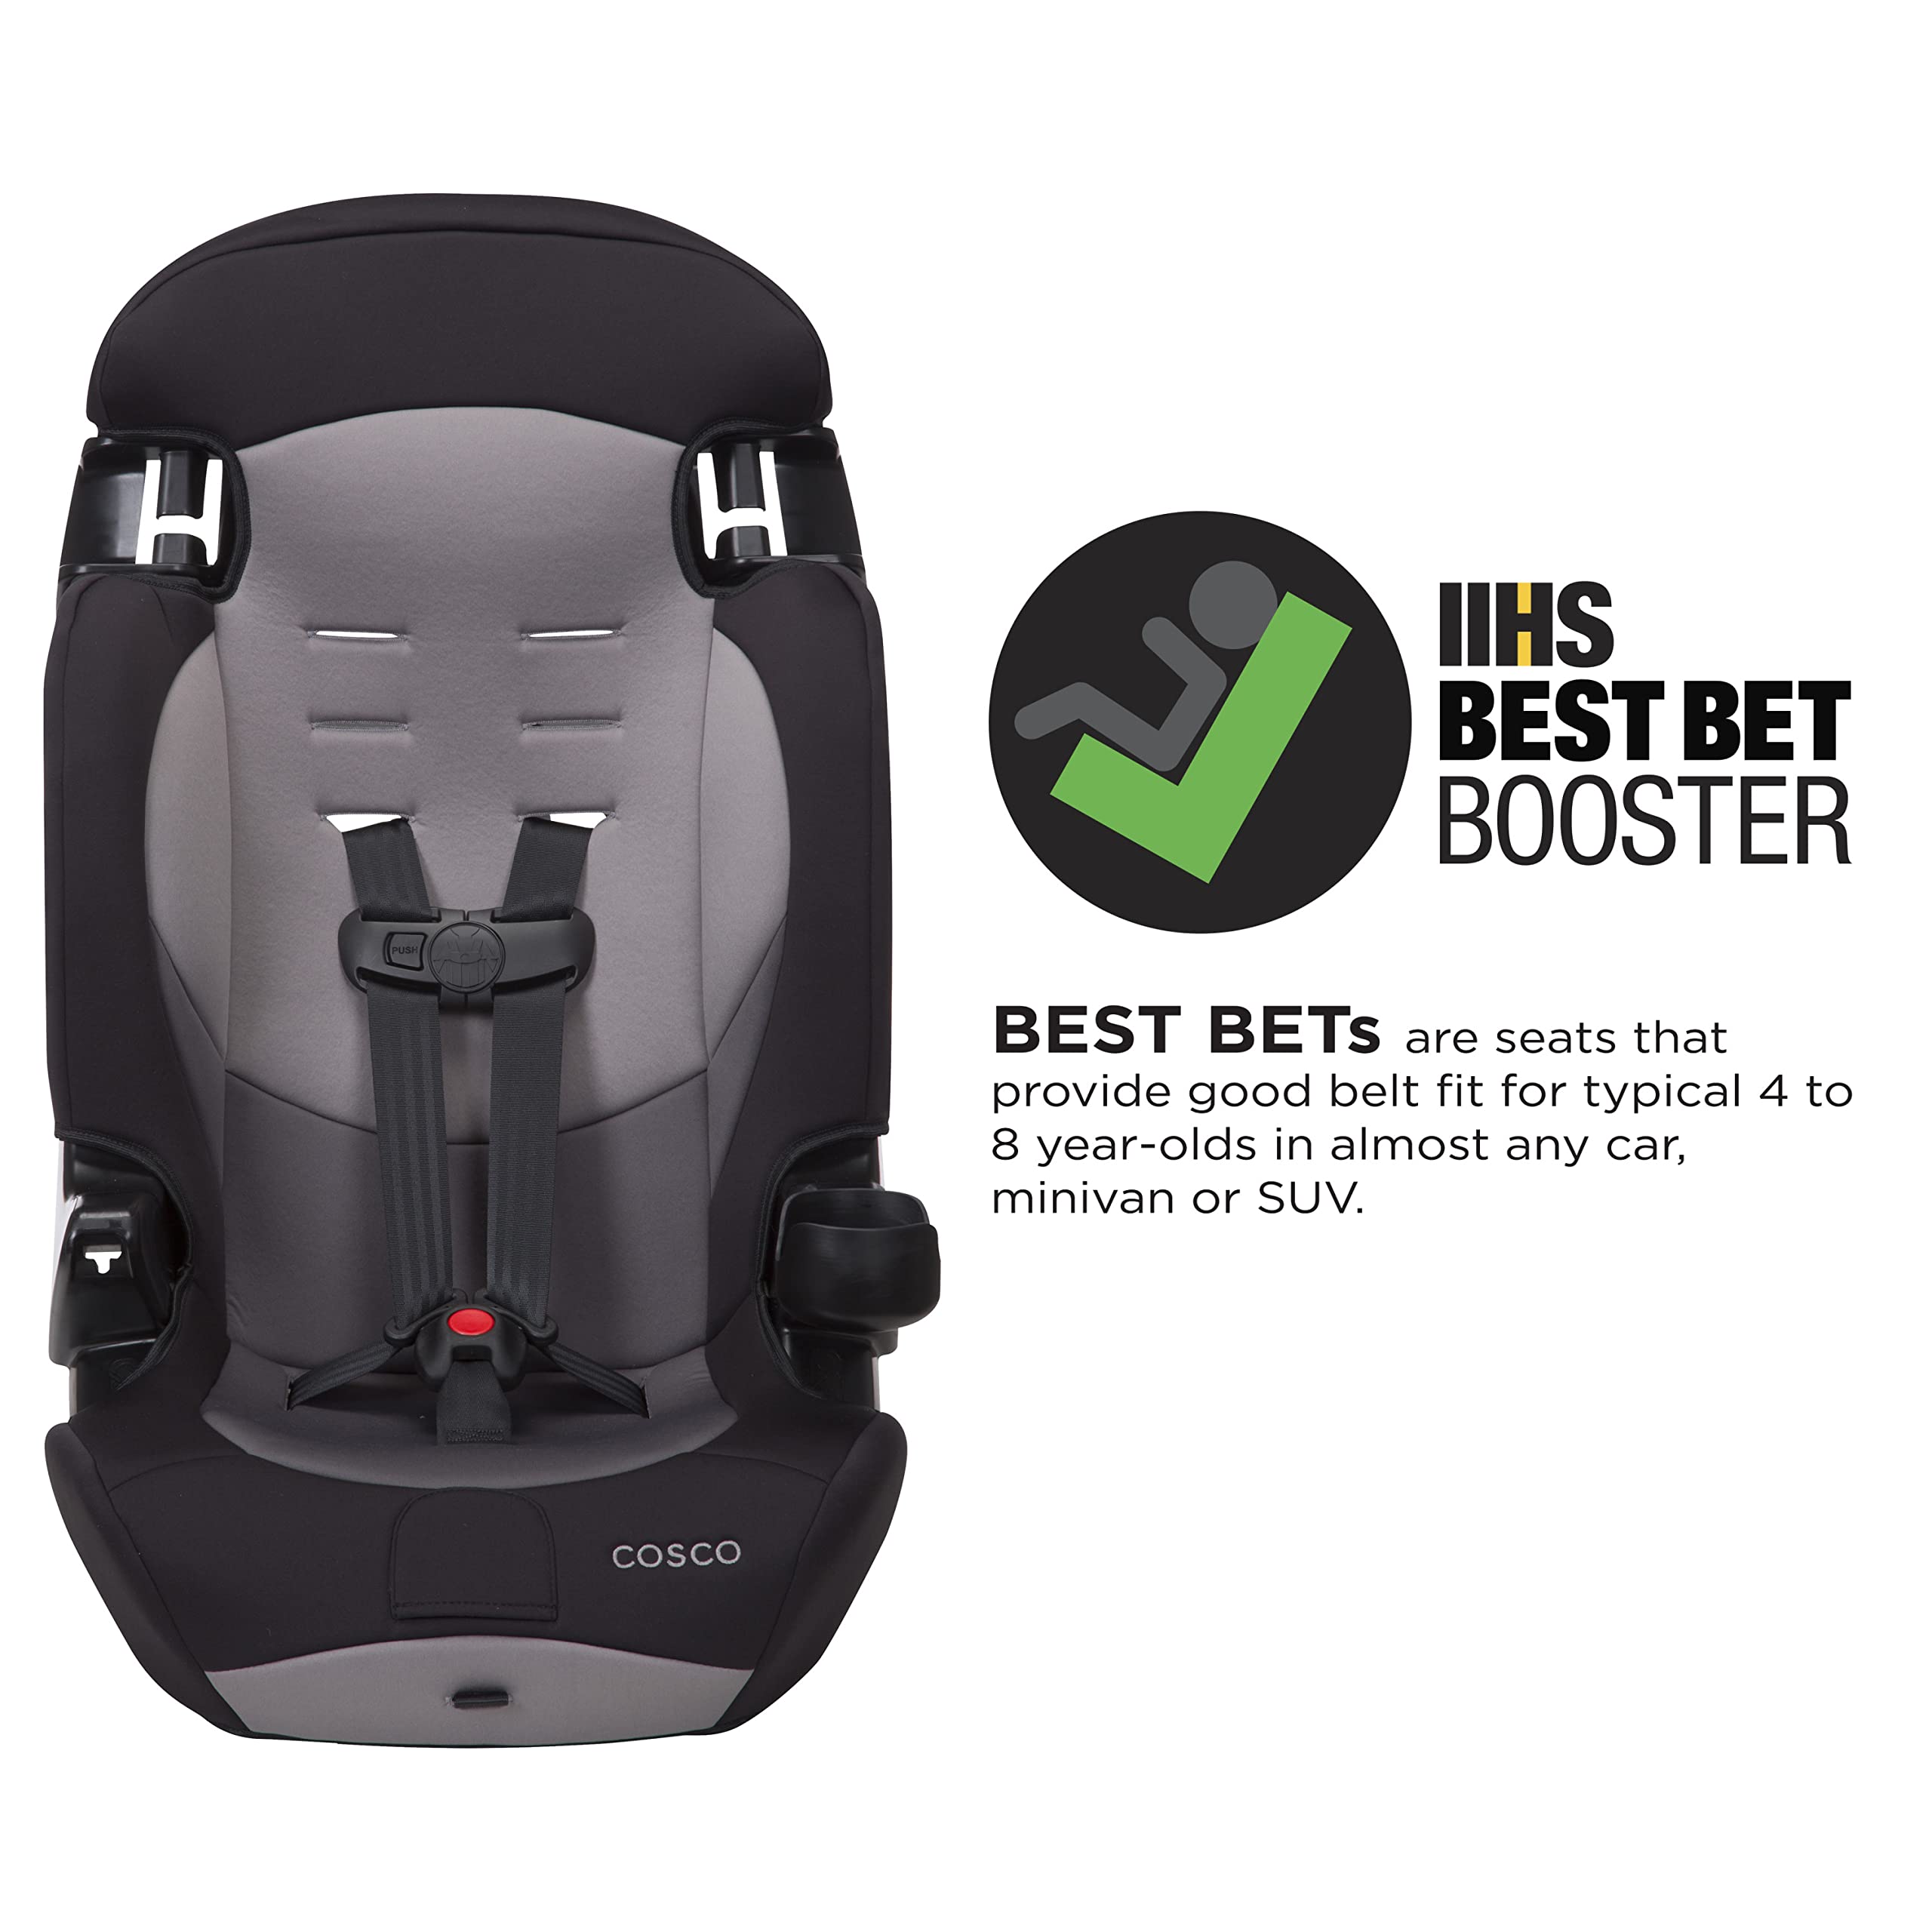 Cosco Mighty Fit 65 DX Convertible Car Seat (Heather Onyx Gray) & Finale DX 2-in-1 Booster Car Seat, Forward Facing 40-100 lbs, Rainbow